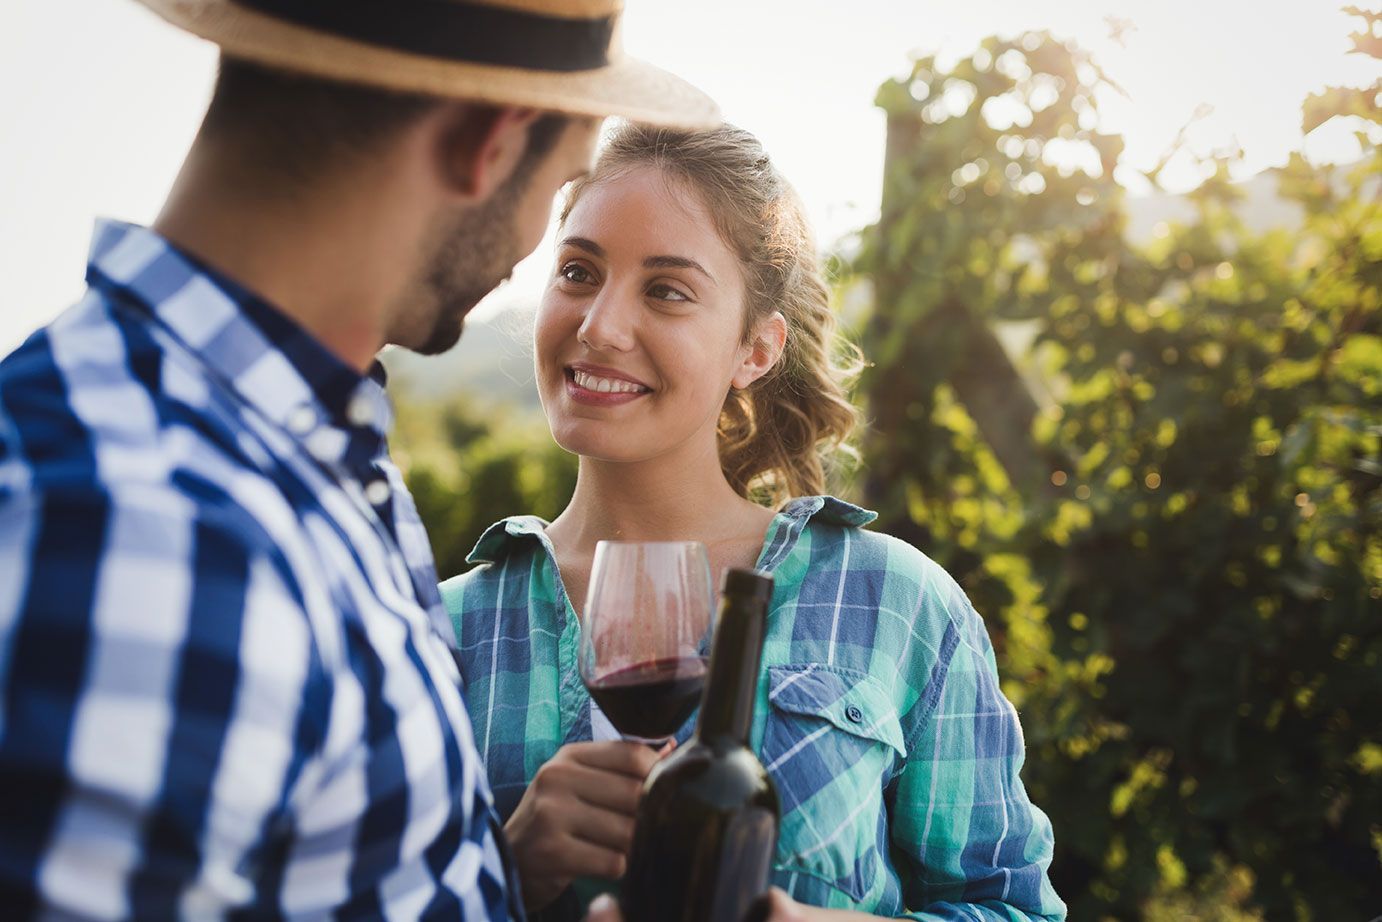 Happy couple enjoying a wine-tasting experience in a sunlit vineyard, embodying a romantic getaway.